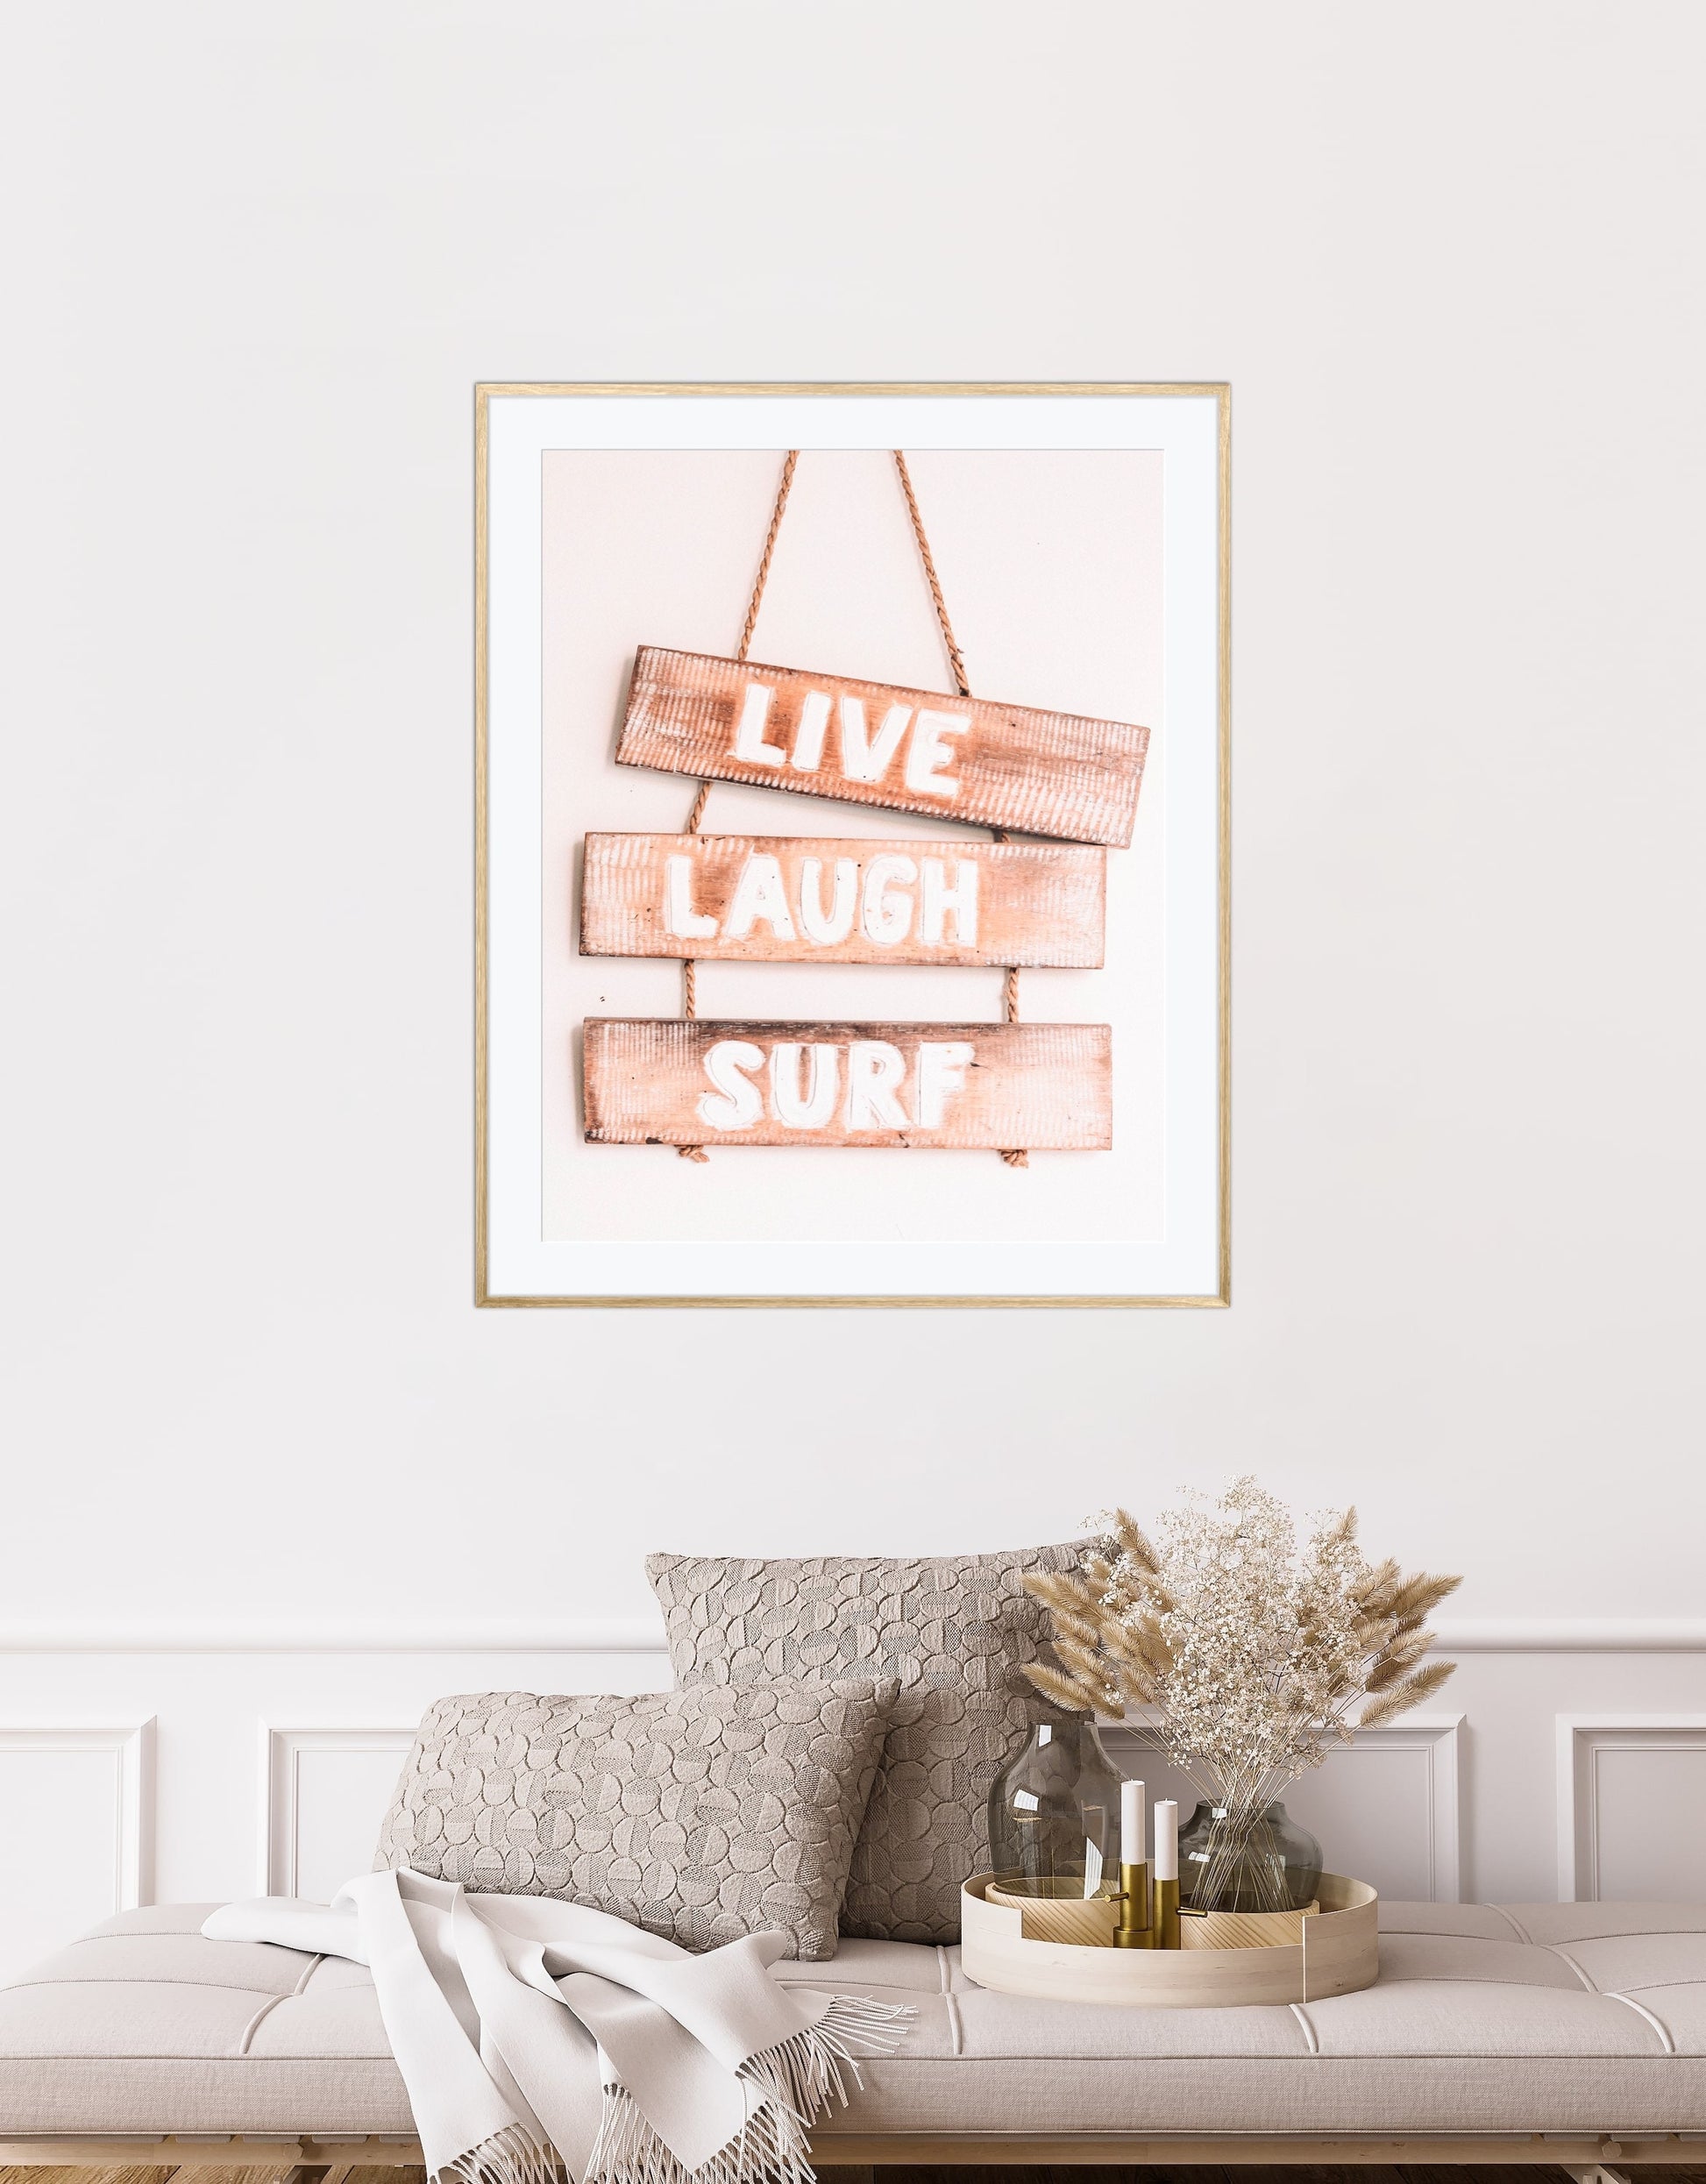 Surf poster INSTANT DOWNLOAD, surf quote, surf wall art, surf saying, coastal wall decor, beach house decor, beach wall art, coastal decor